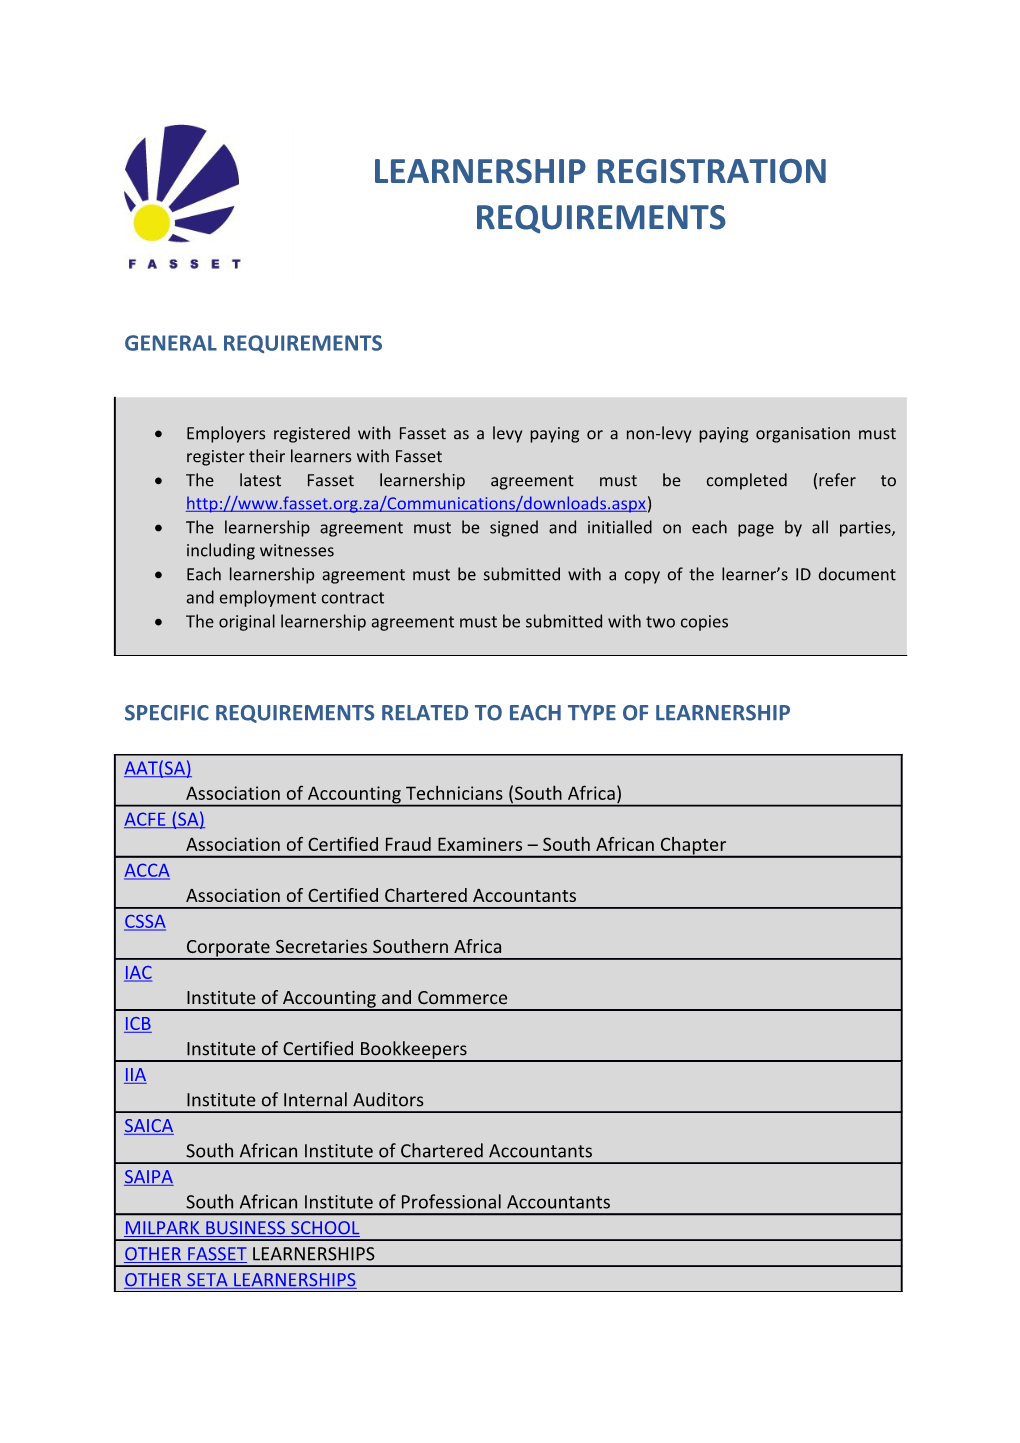 Specific Requirements Related to Each Type of Learnership